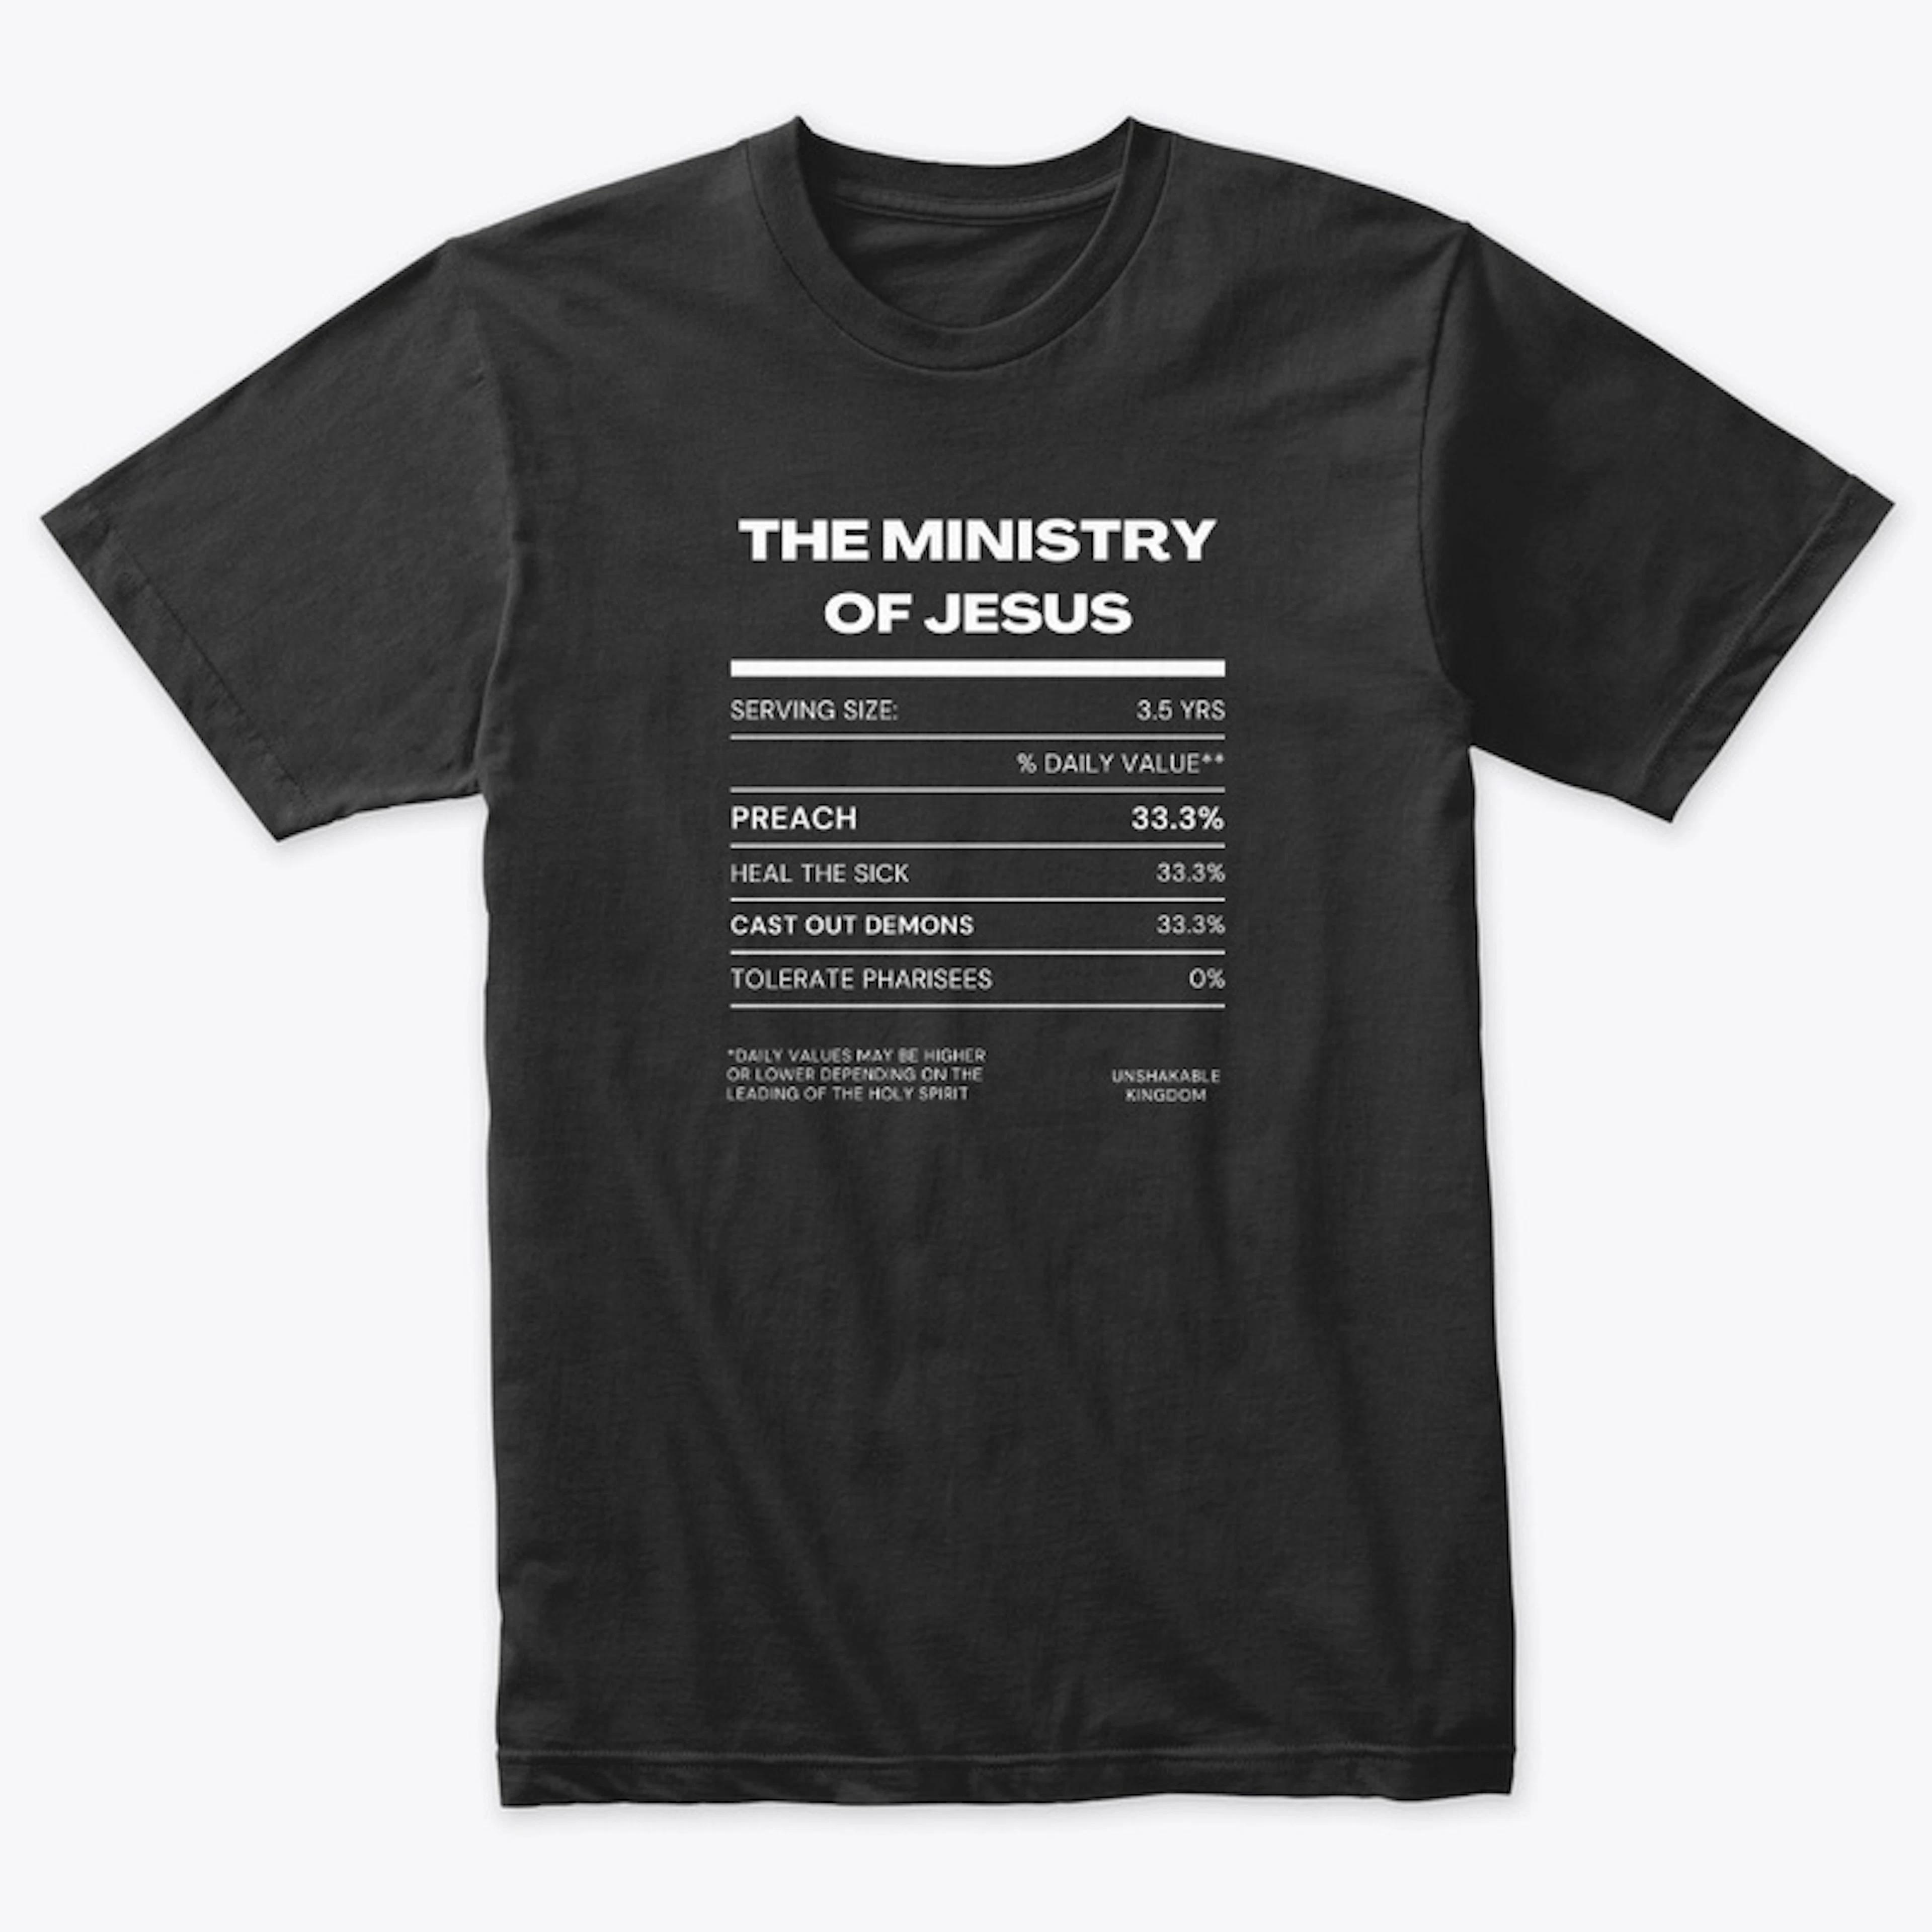 THE MINISTRY OF JESUS